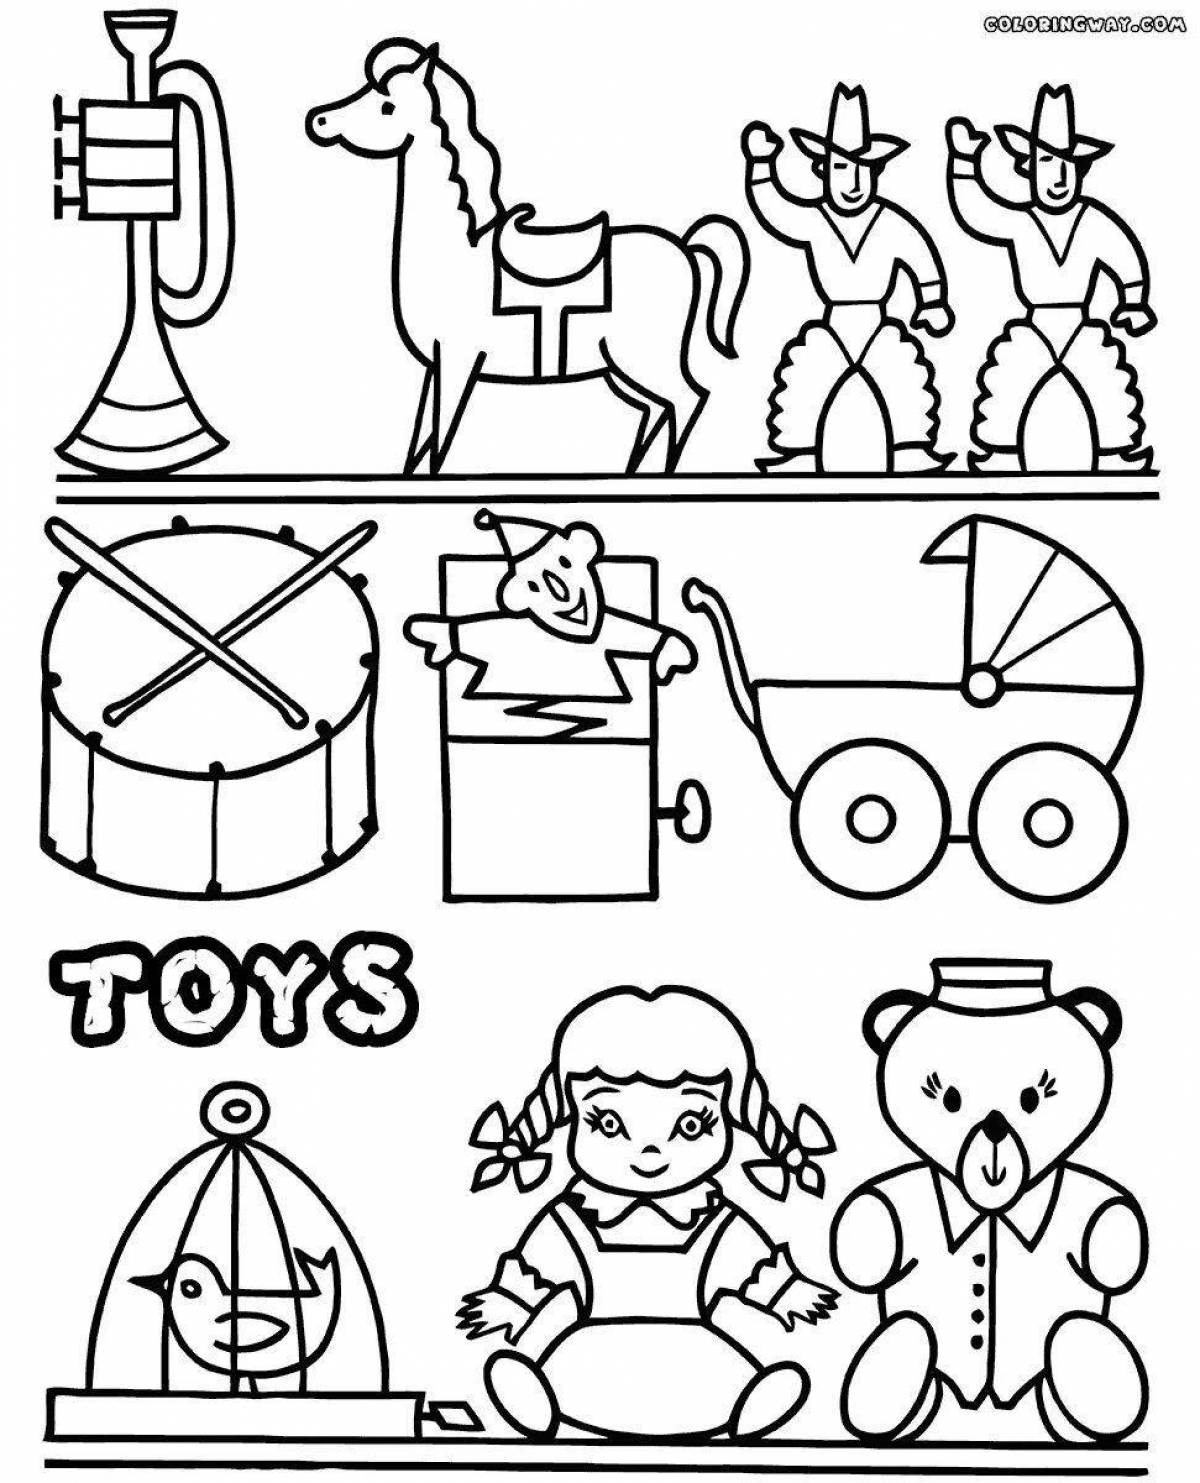 Coloring book holiday toy factory